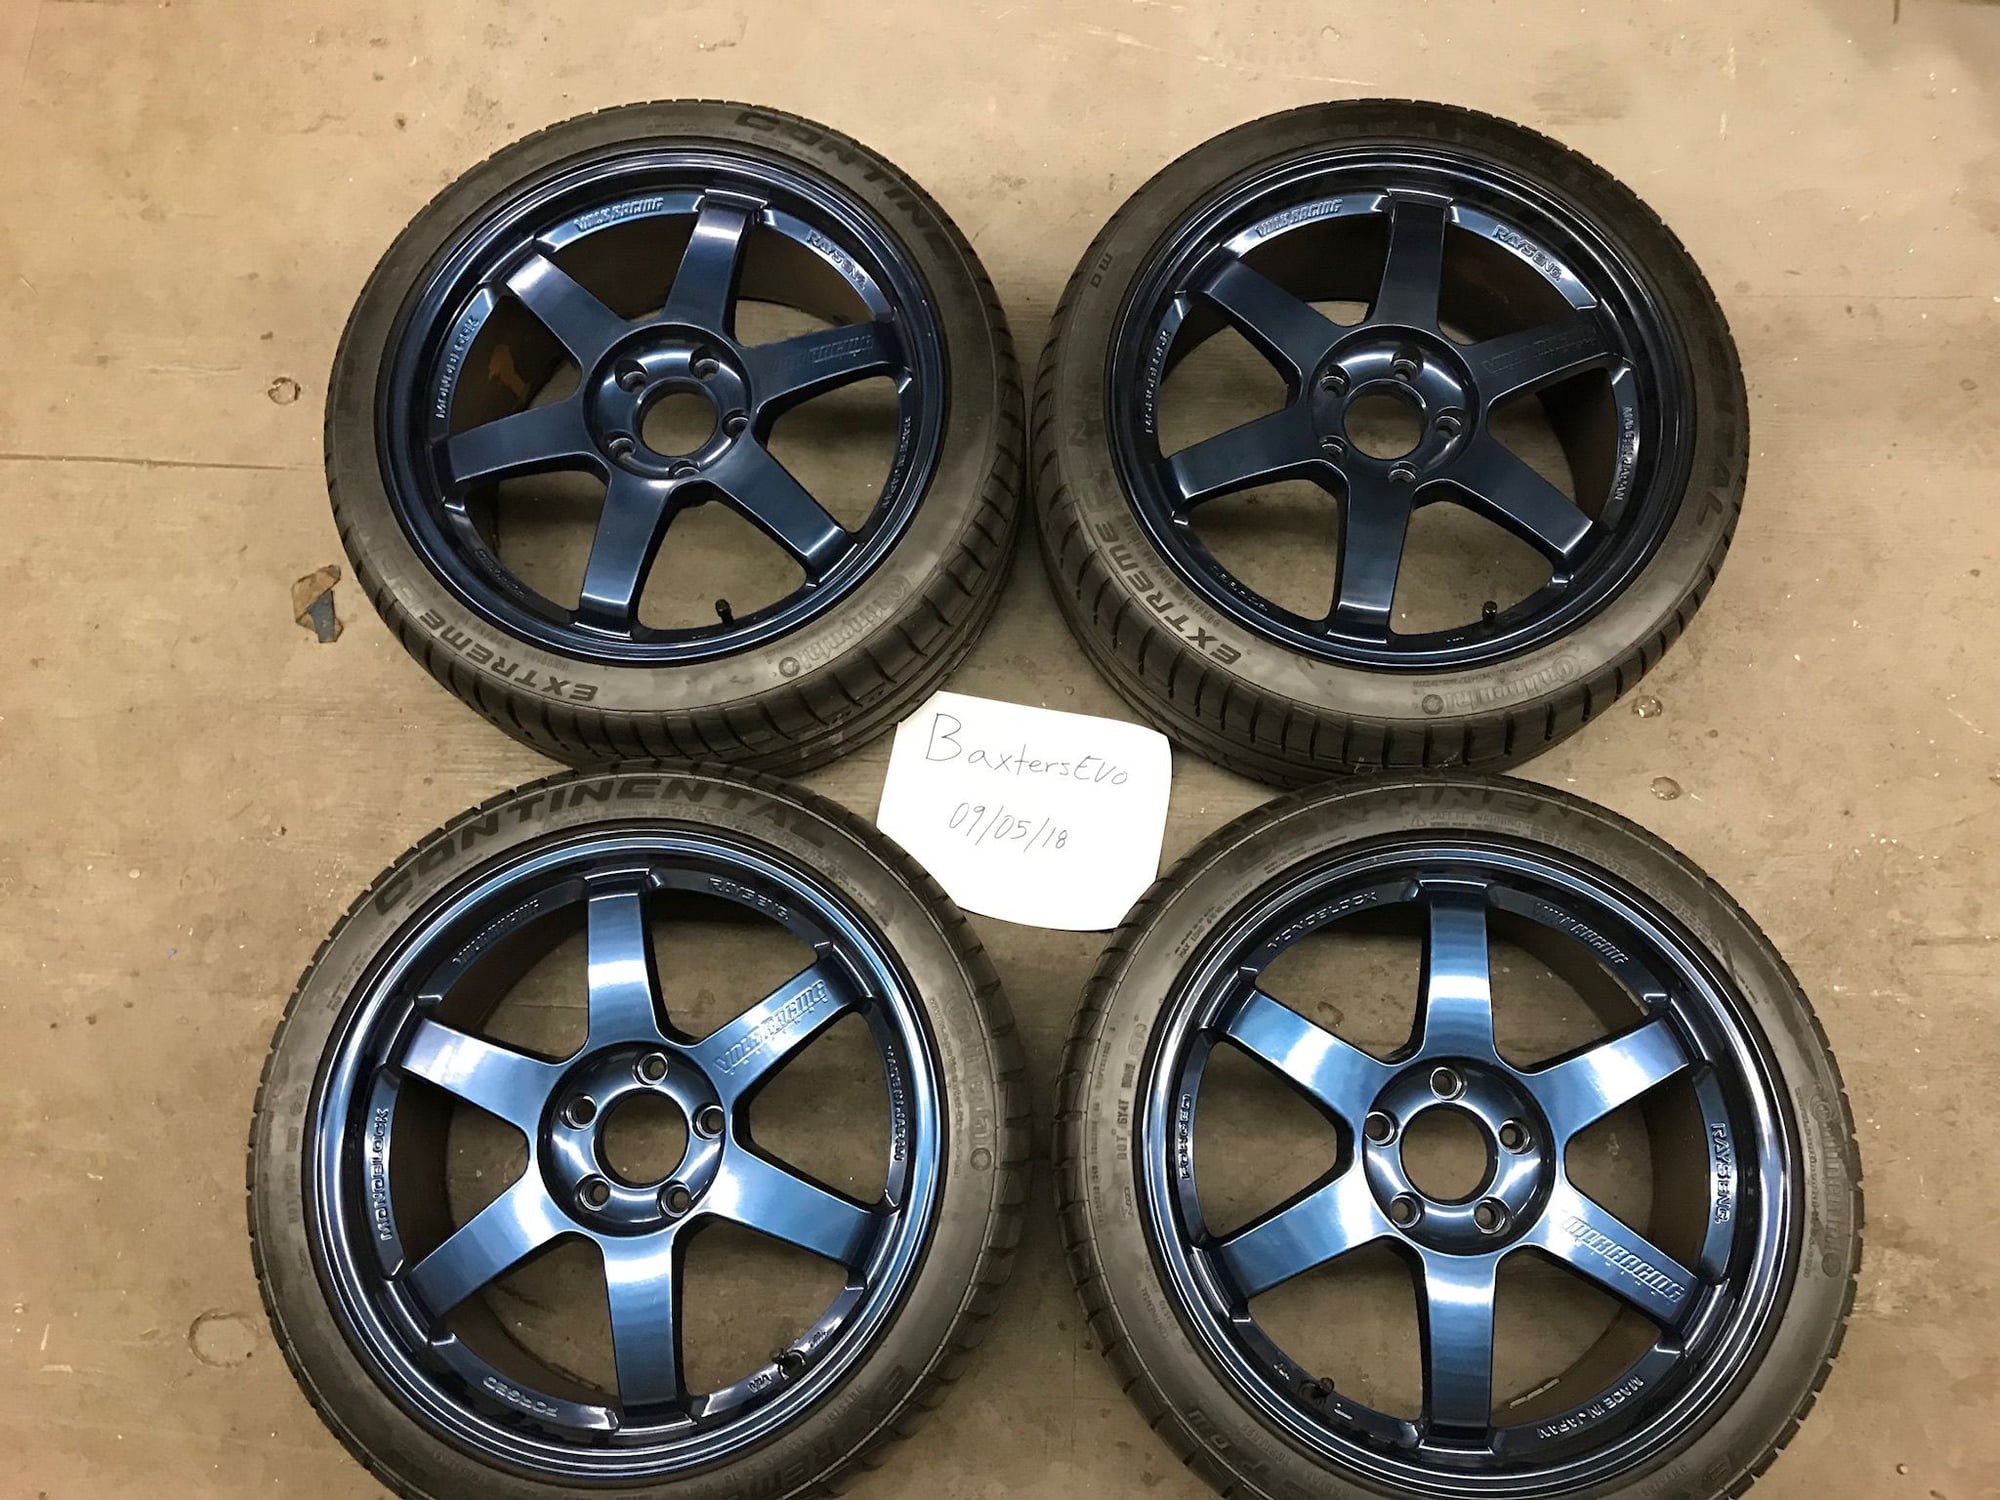 Wheels and Tires/Axles - Rays Volk TE37s - Used - Rockford, IL 61108, United States